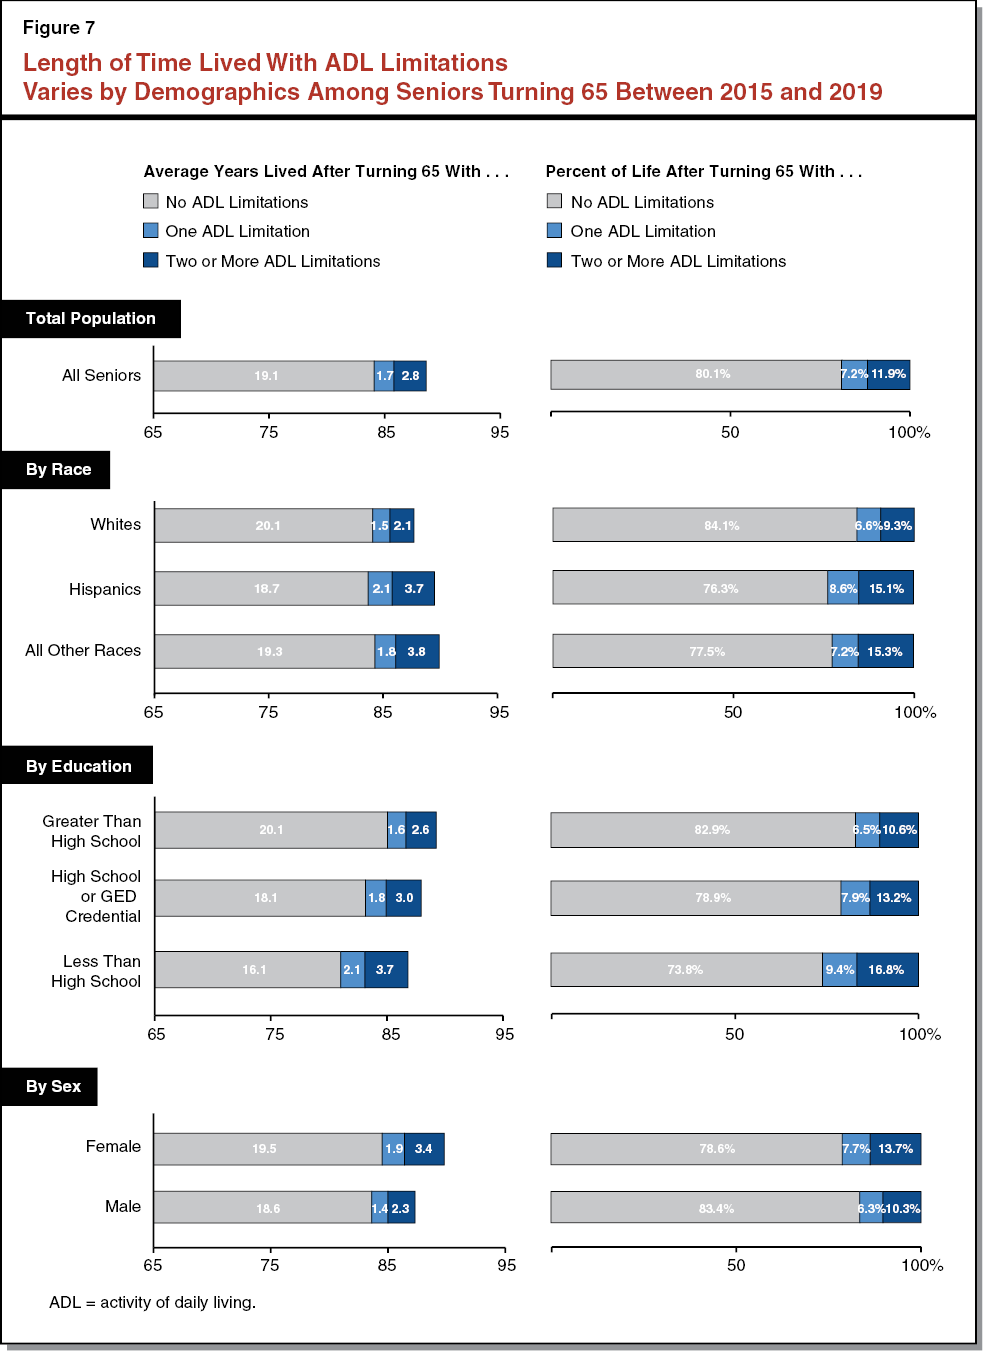 Figure 7 - Length of Time Lived with ADL Limitations Varies By Demographics Among Seniors Turning 65 in 2015 and 2019